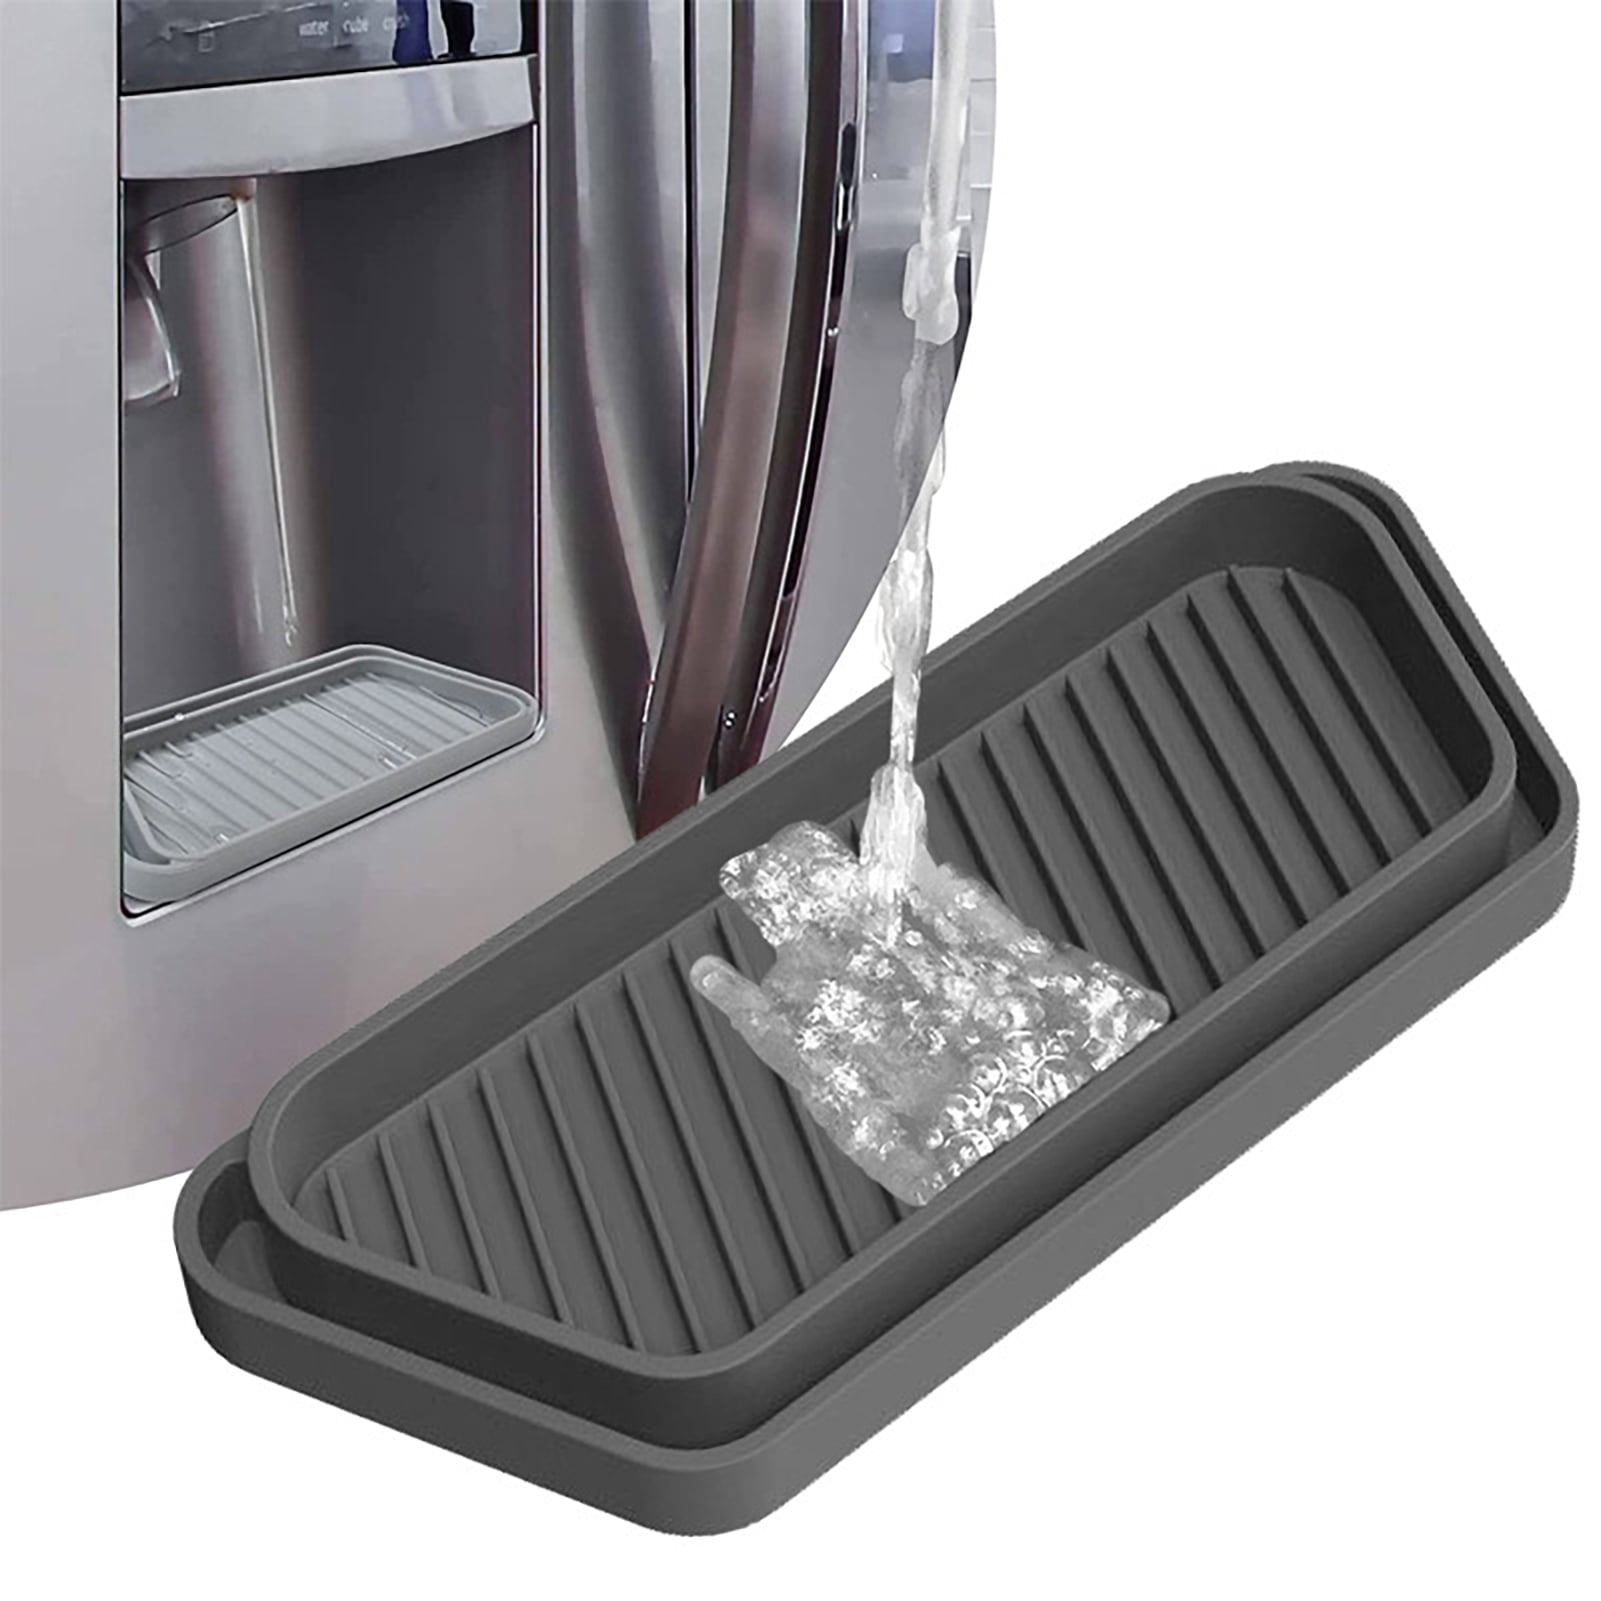 Refrigerator Drip Tray Catcher Fridge Drip Tray Water Dispenser Silicone Pan for Drainage, Size: 20.5X8.5CM